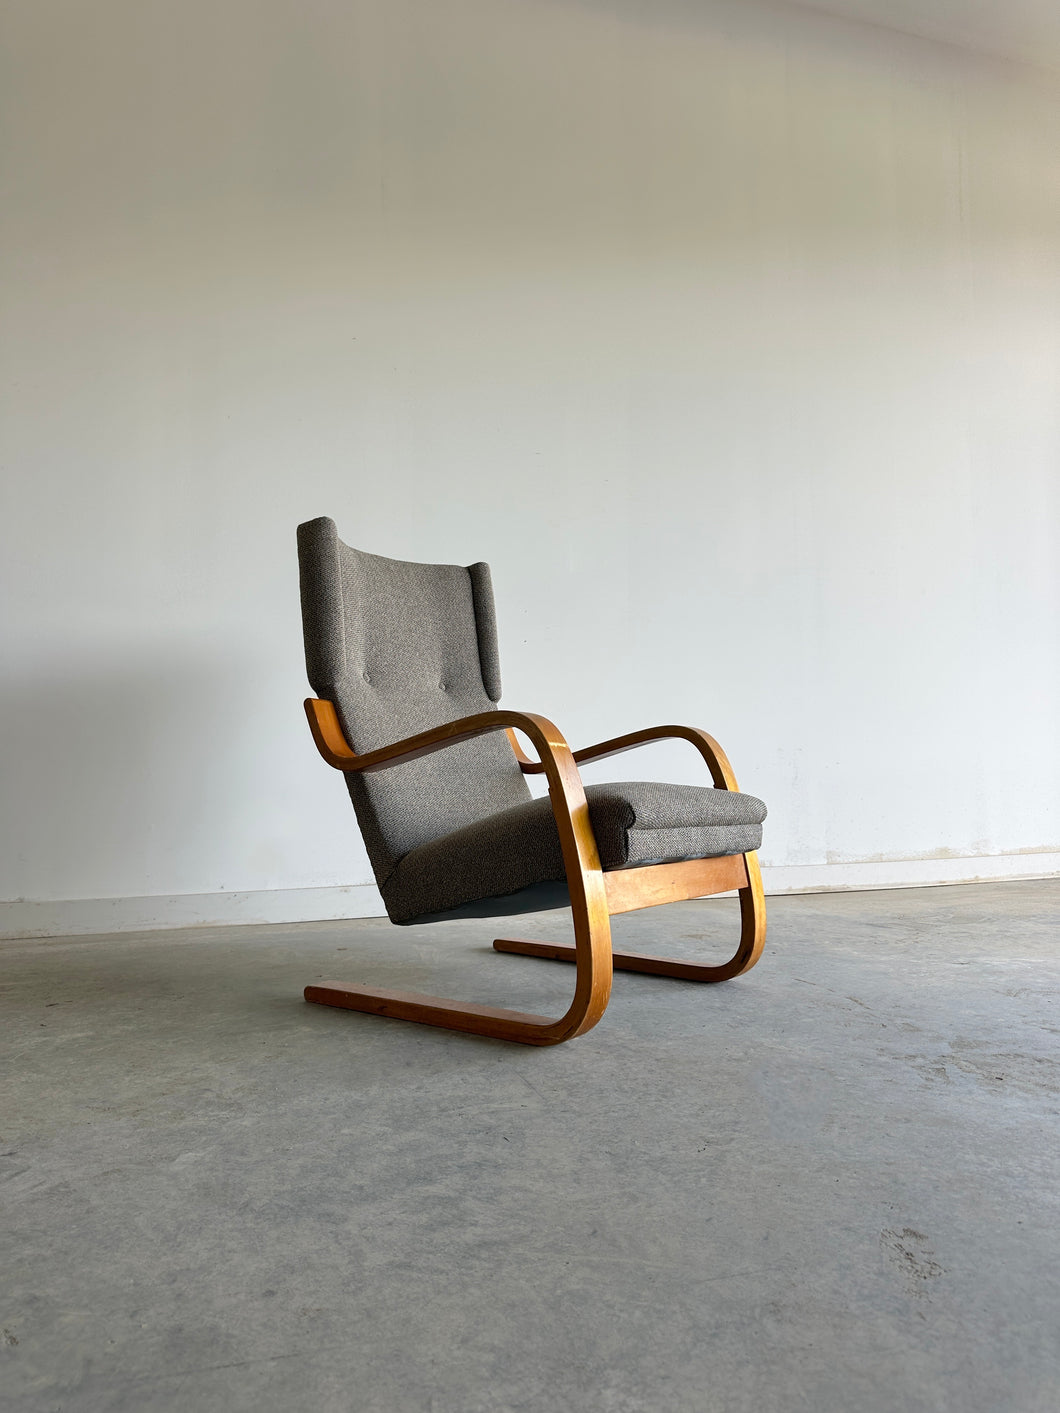 Wingback 36/401 cantilever lounge chair by Alvar Aalto